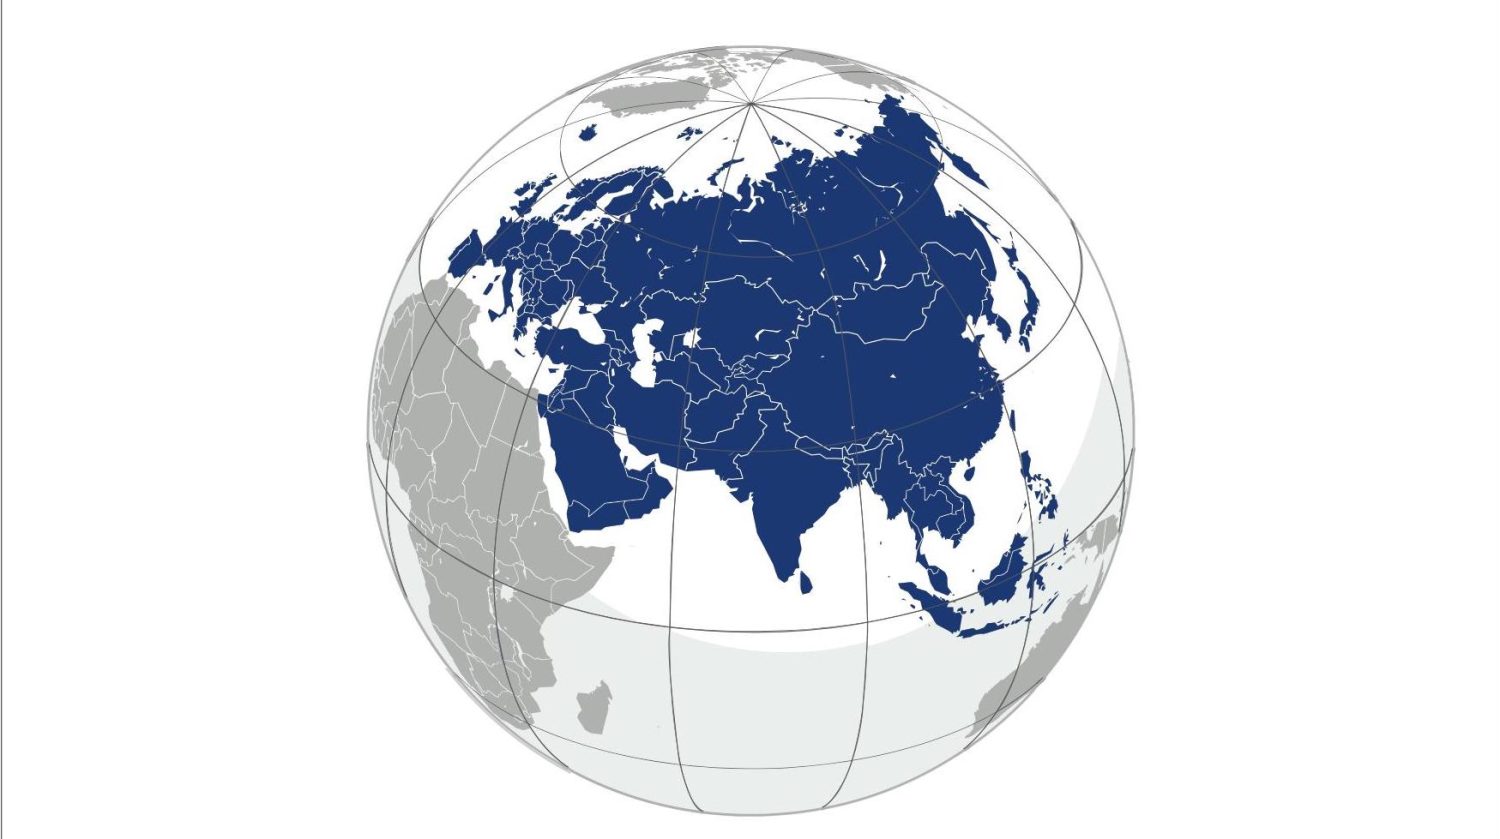 China-Eurasia  Council  for Political and Strategic  Research